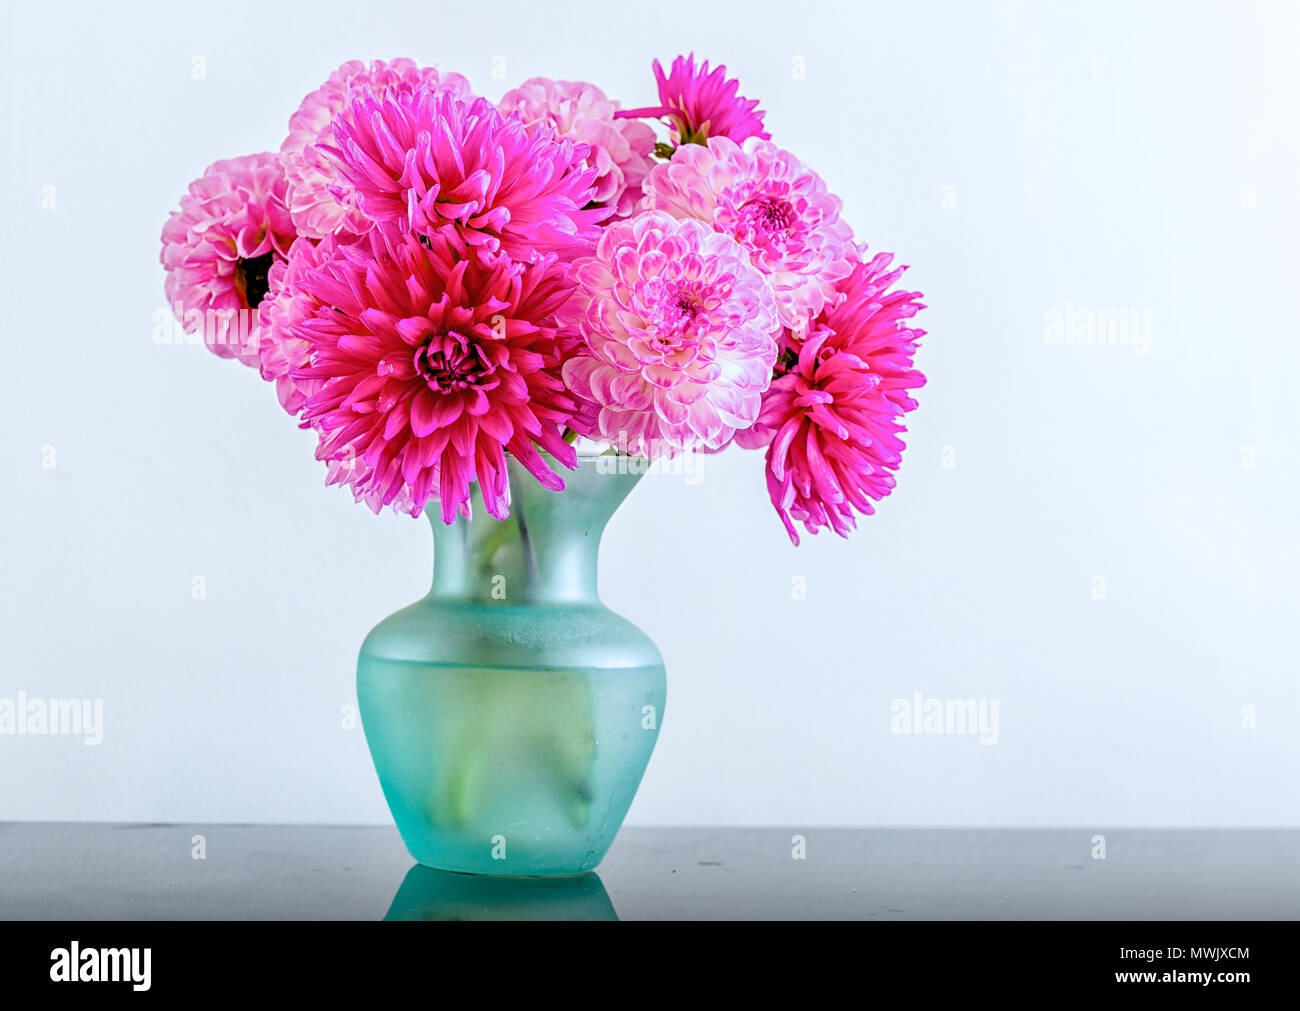 A mixture of pink dahlias in a turquoise vase. Stock Photo